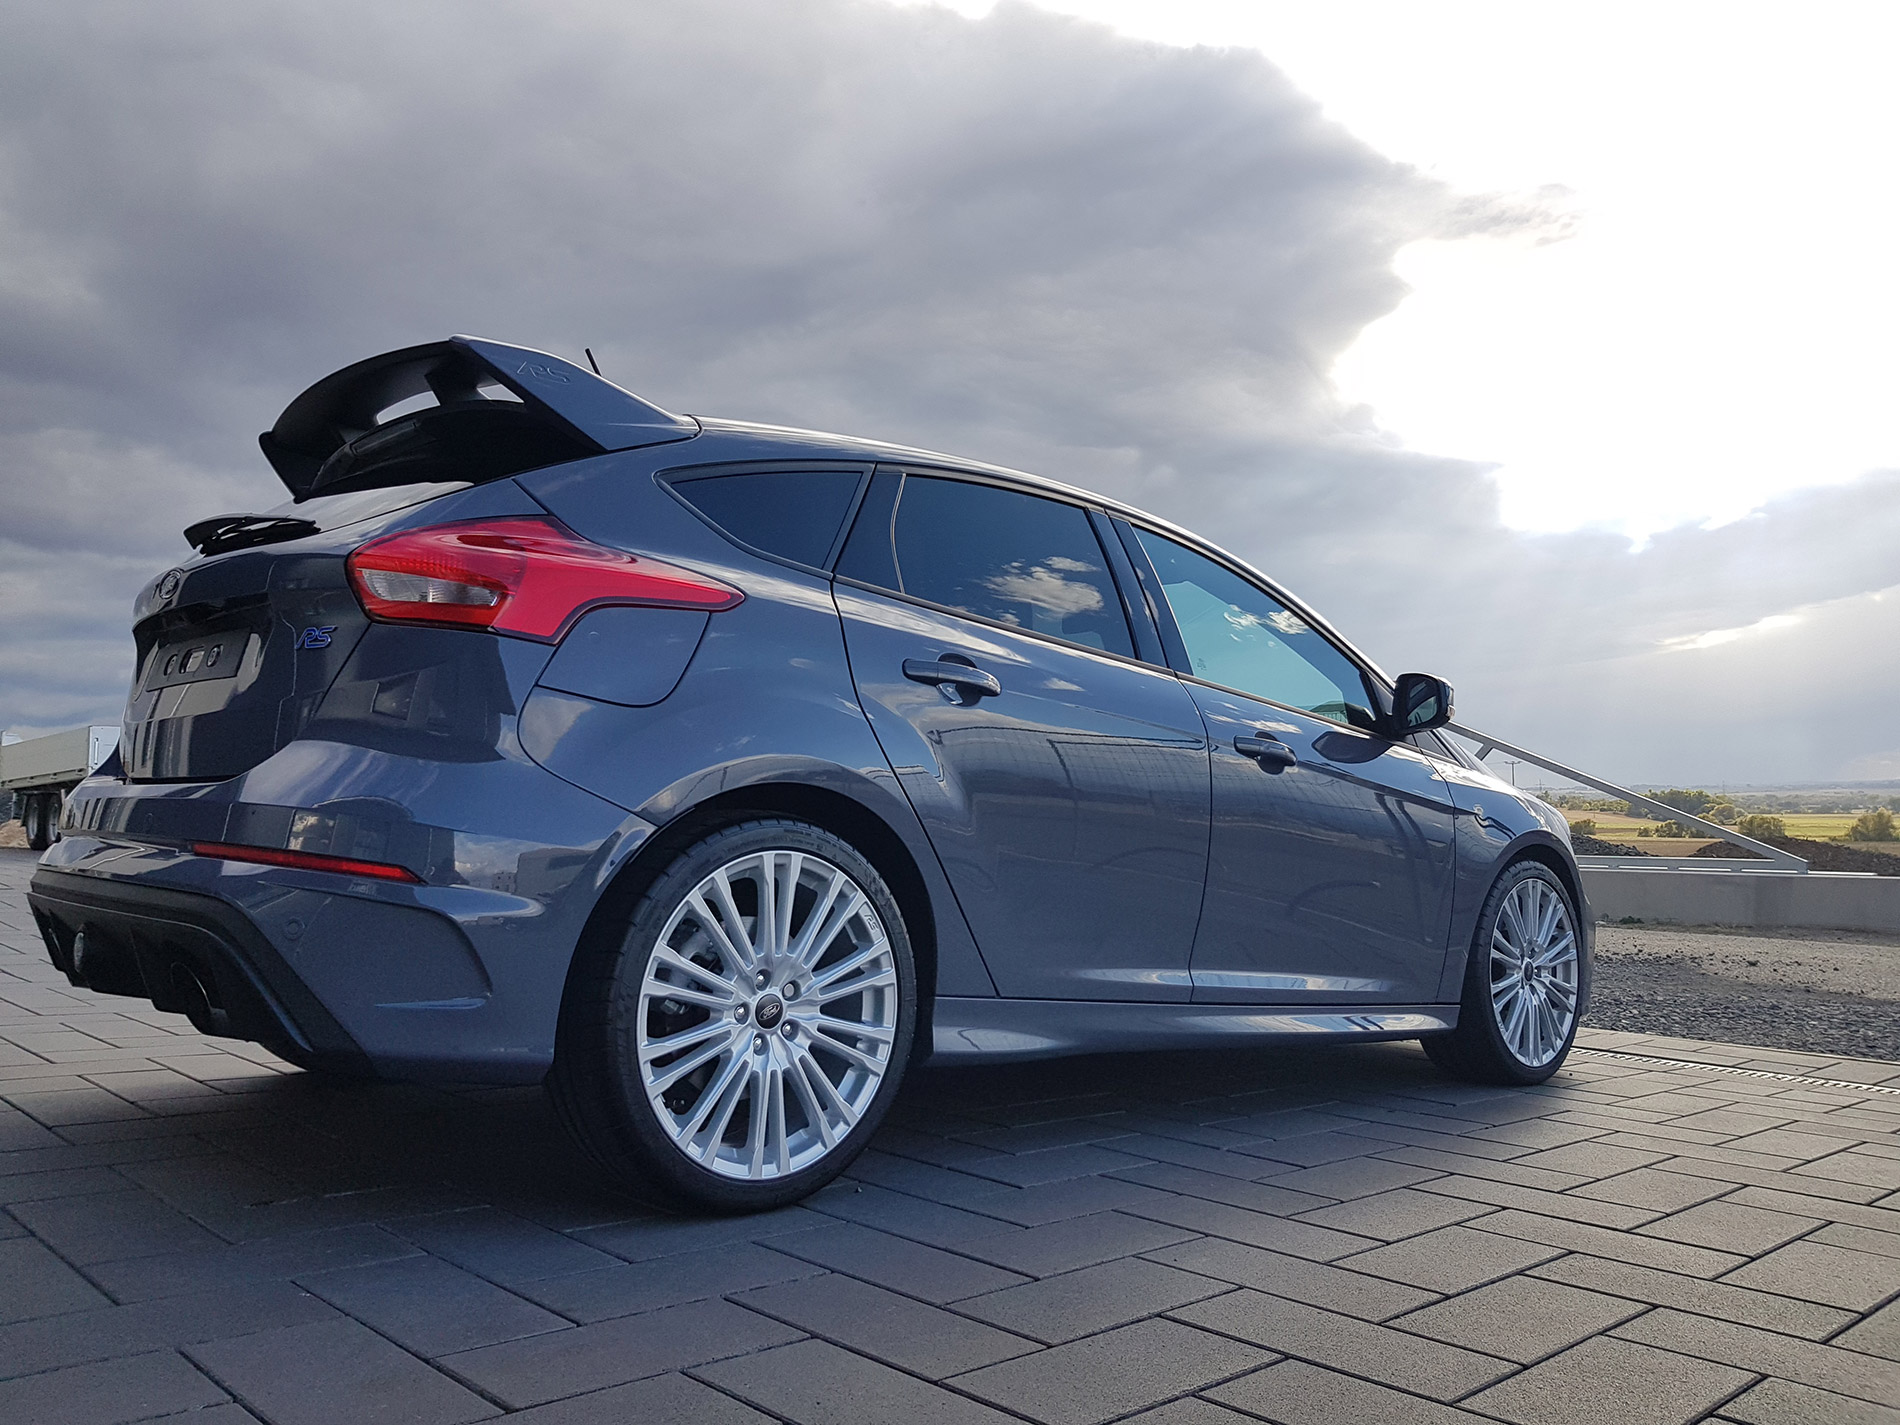 Ford Focus RS 5